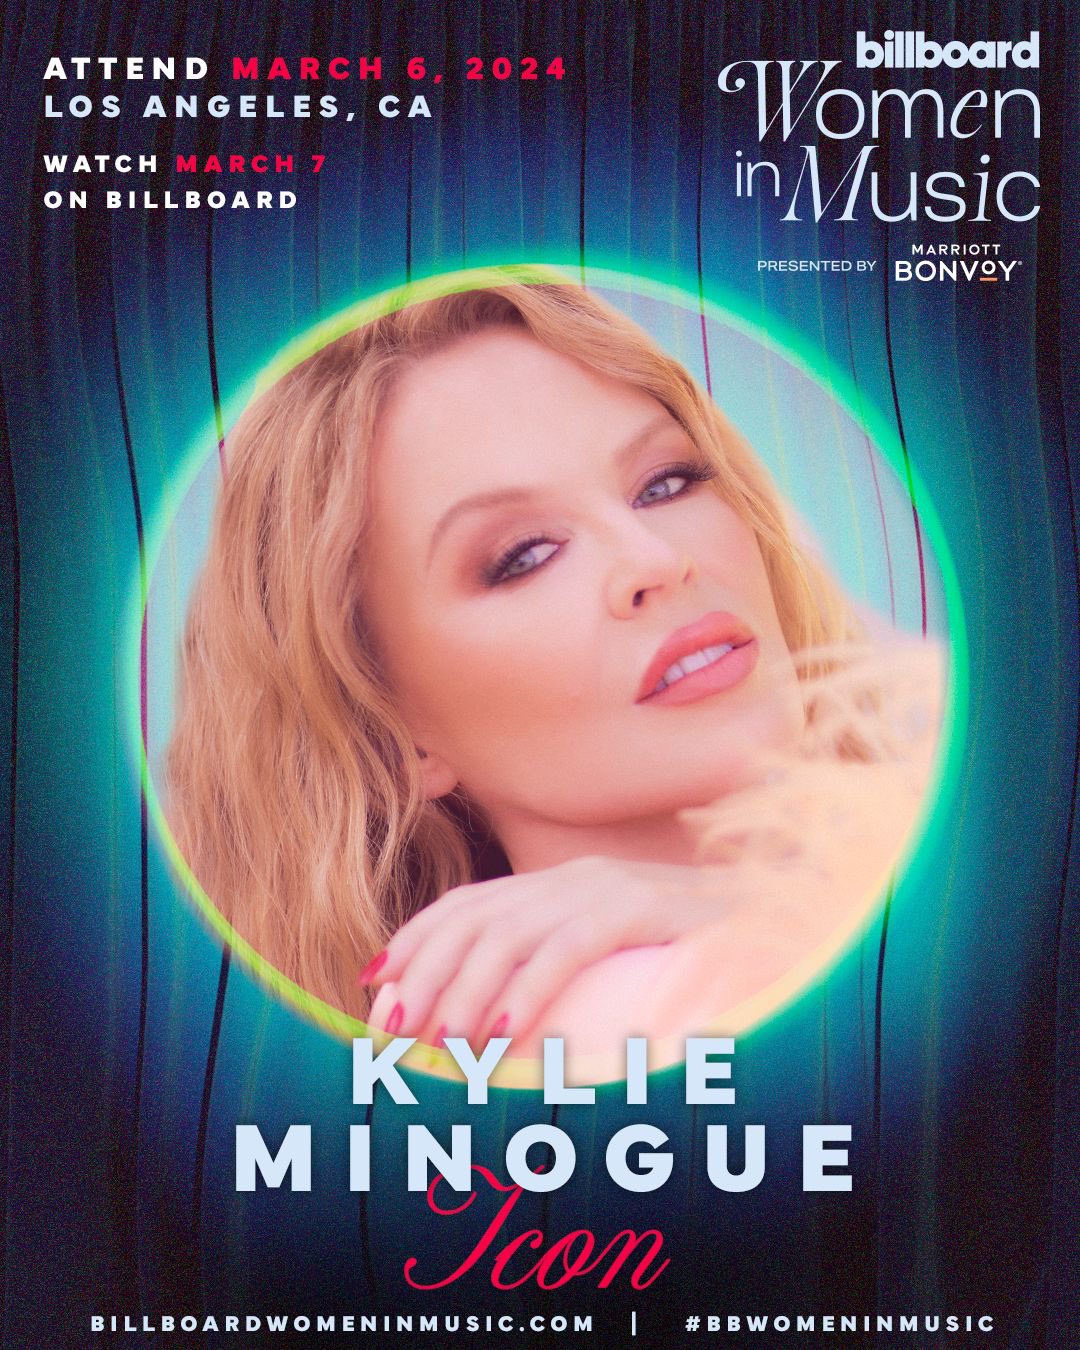 US: Kylie Minogue to receive Icon Award at Billboards 2024 Women in Music Awards